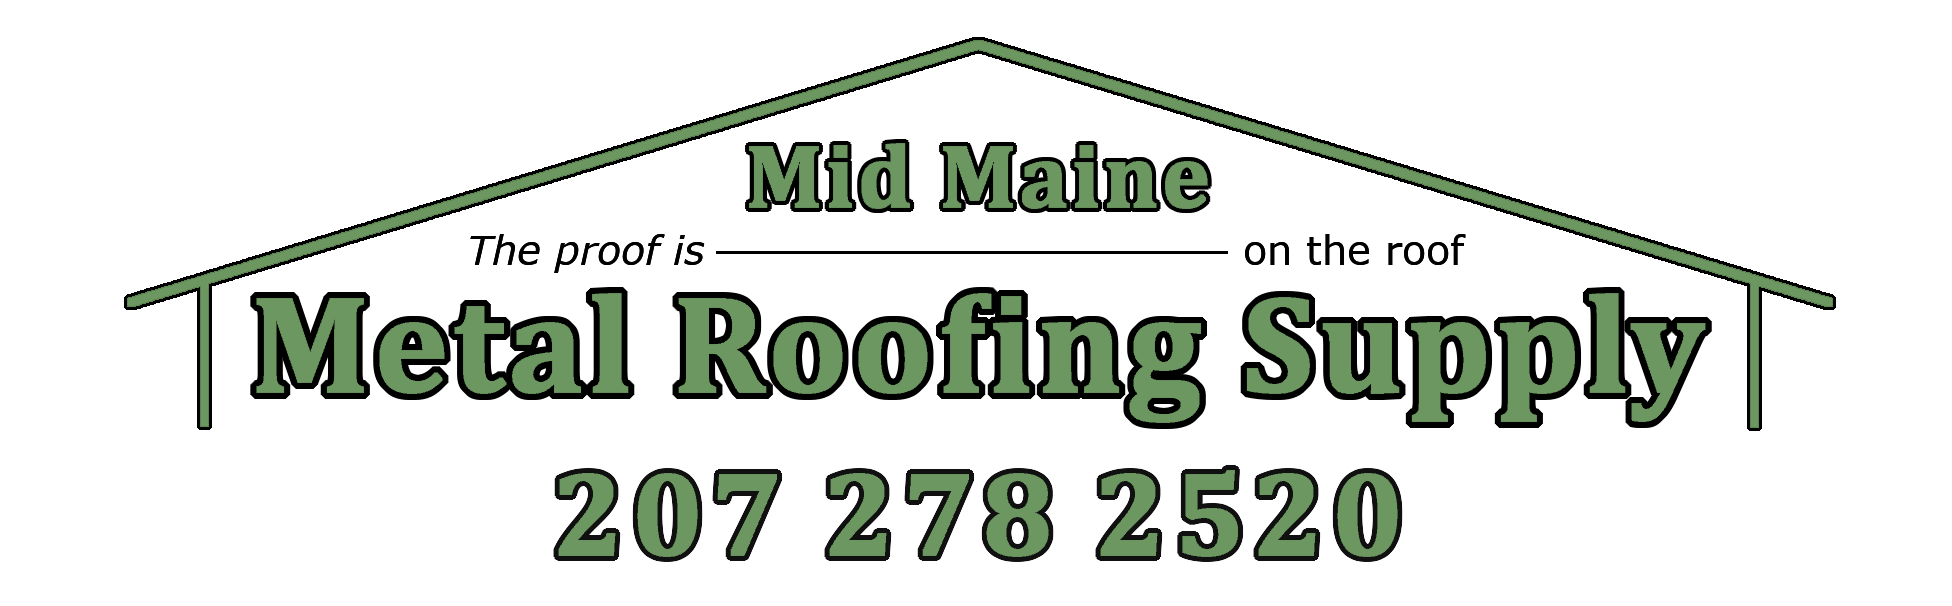 Mid Maine Metal roofing company in Maine